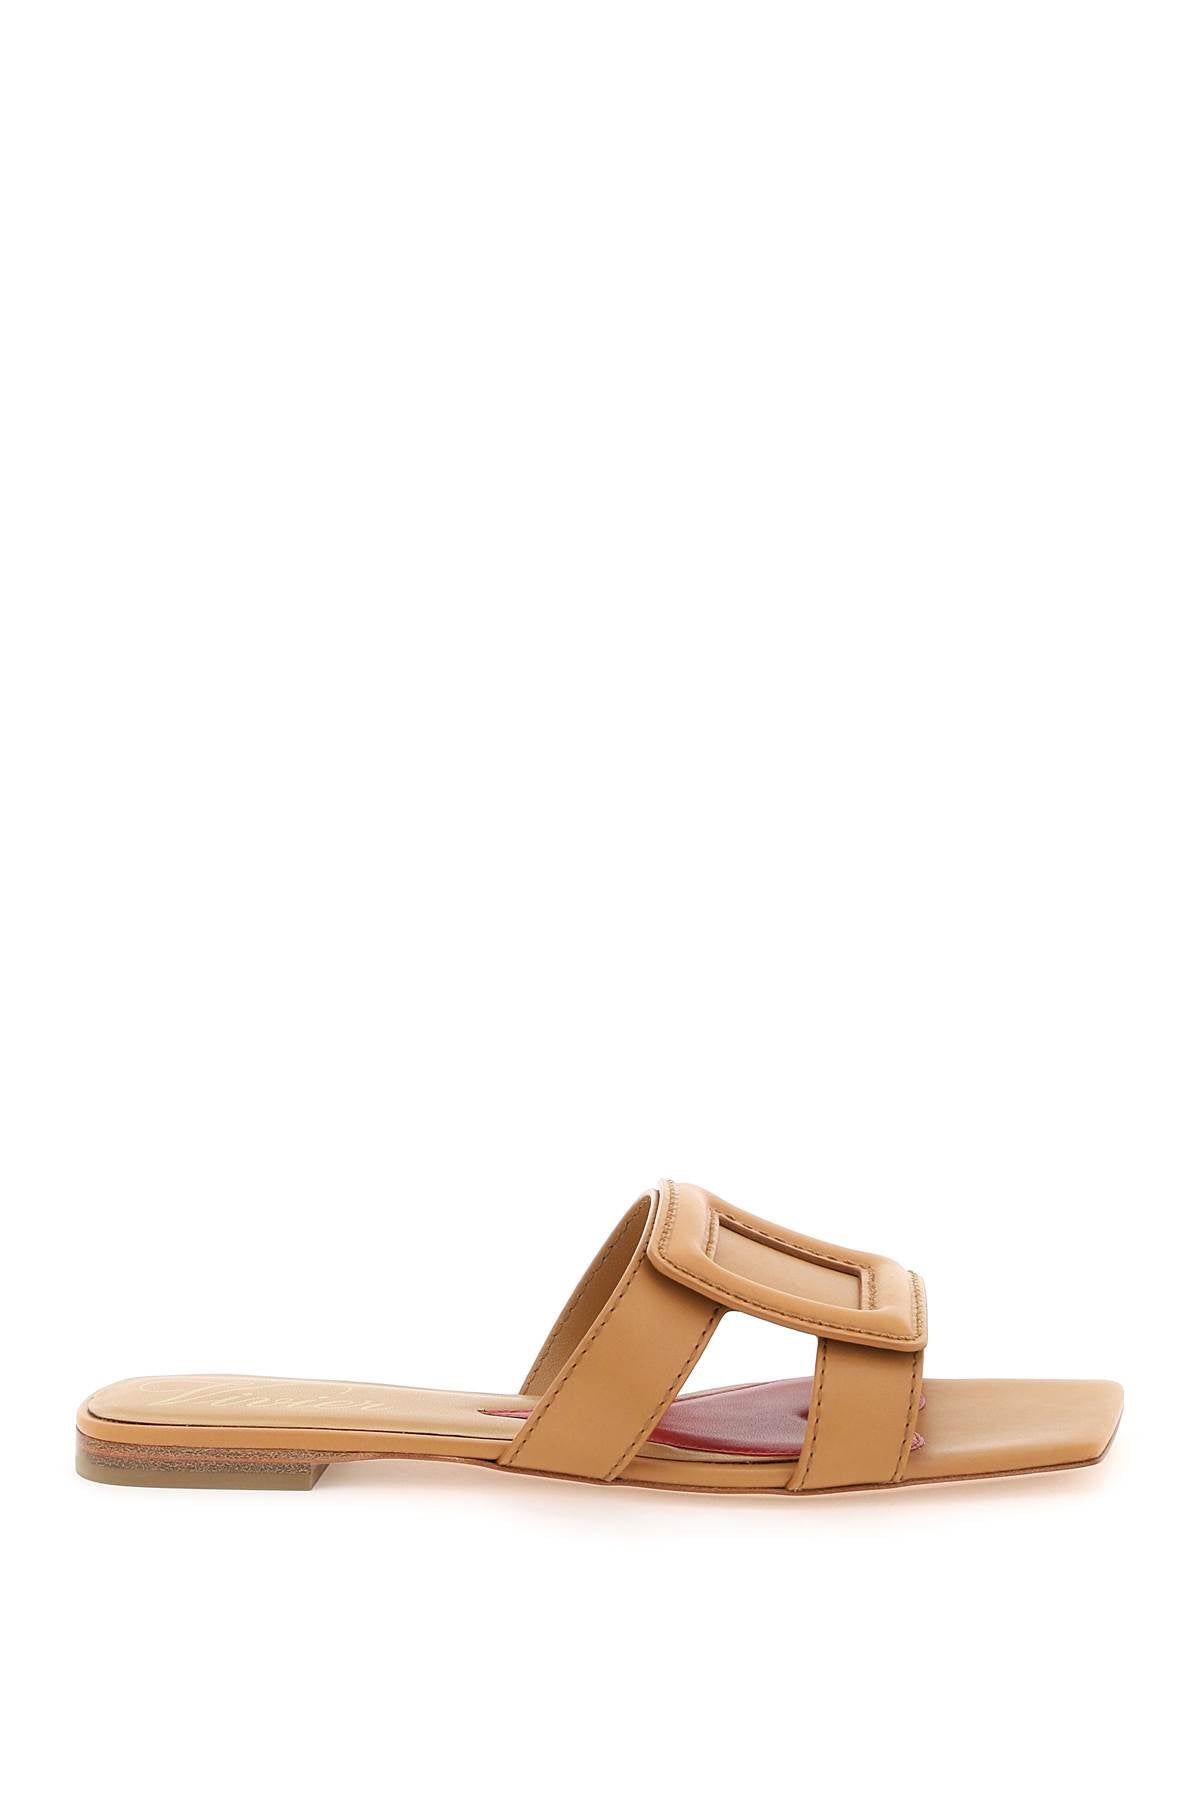 ROGER VIVIER Leather Stitching Buckle Sandals in Brown for Women